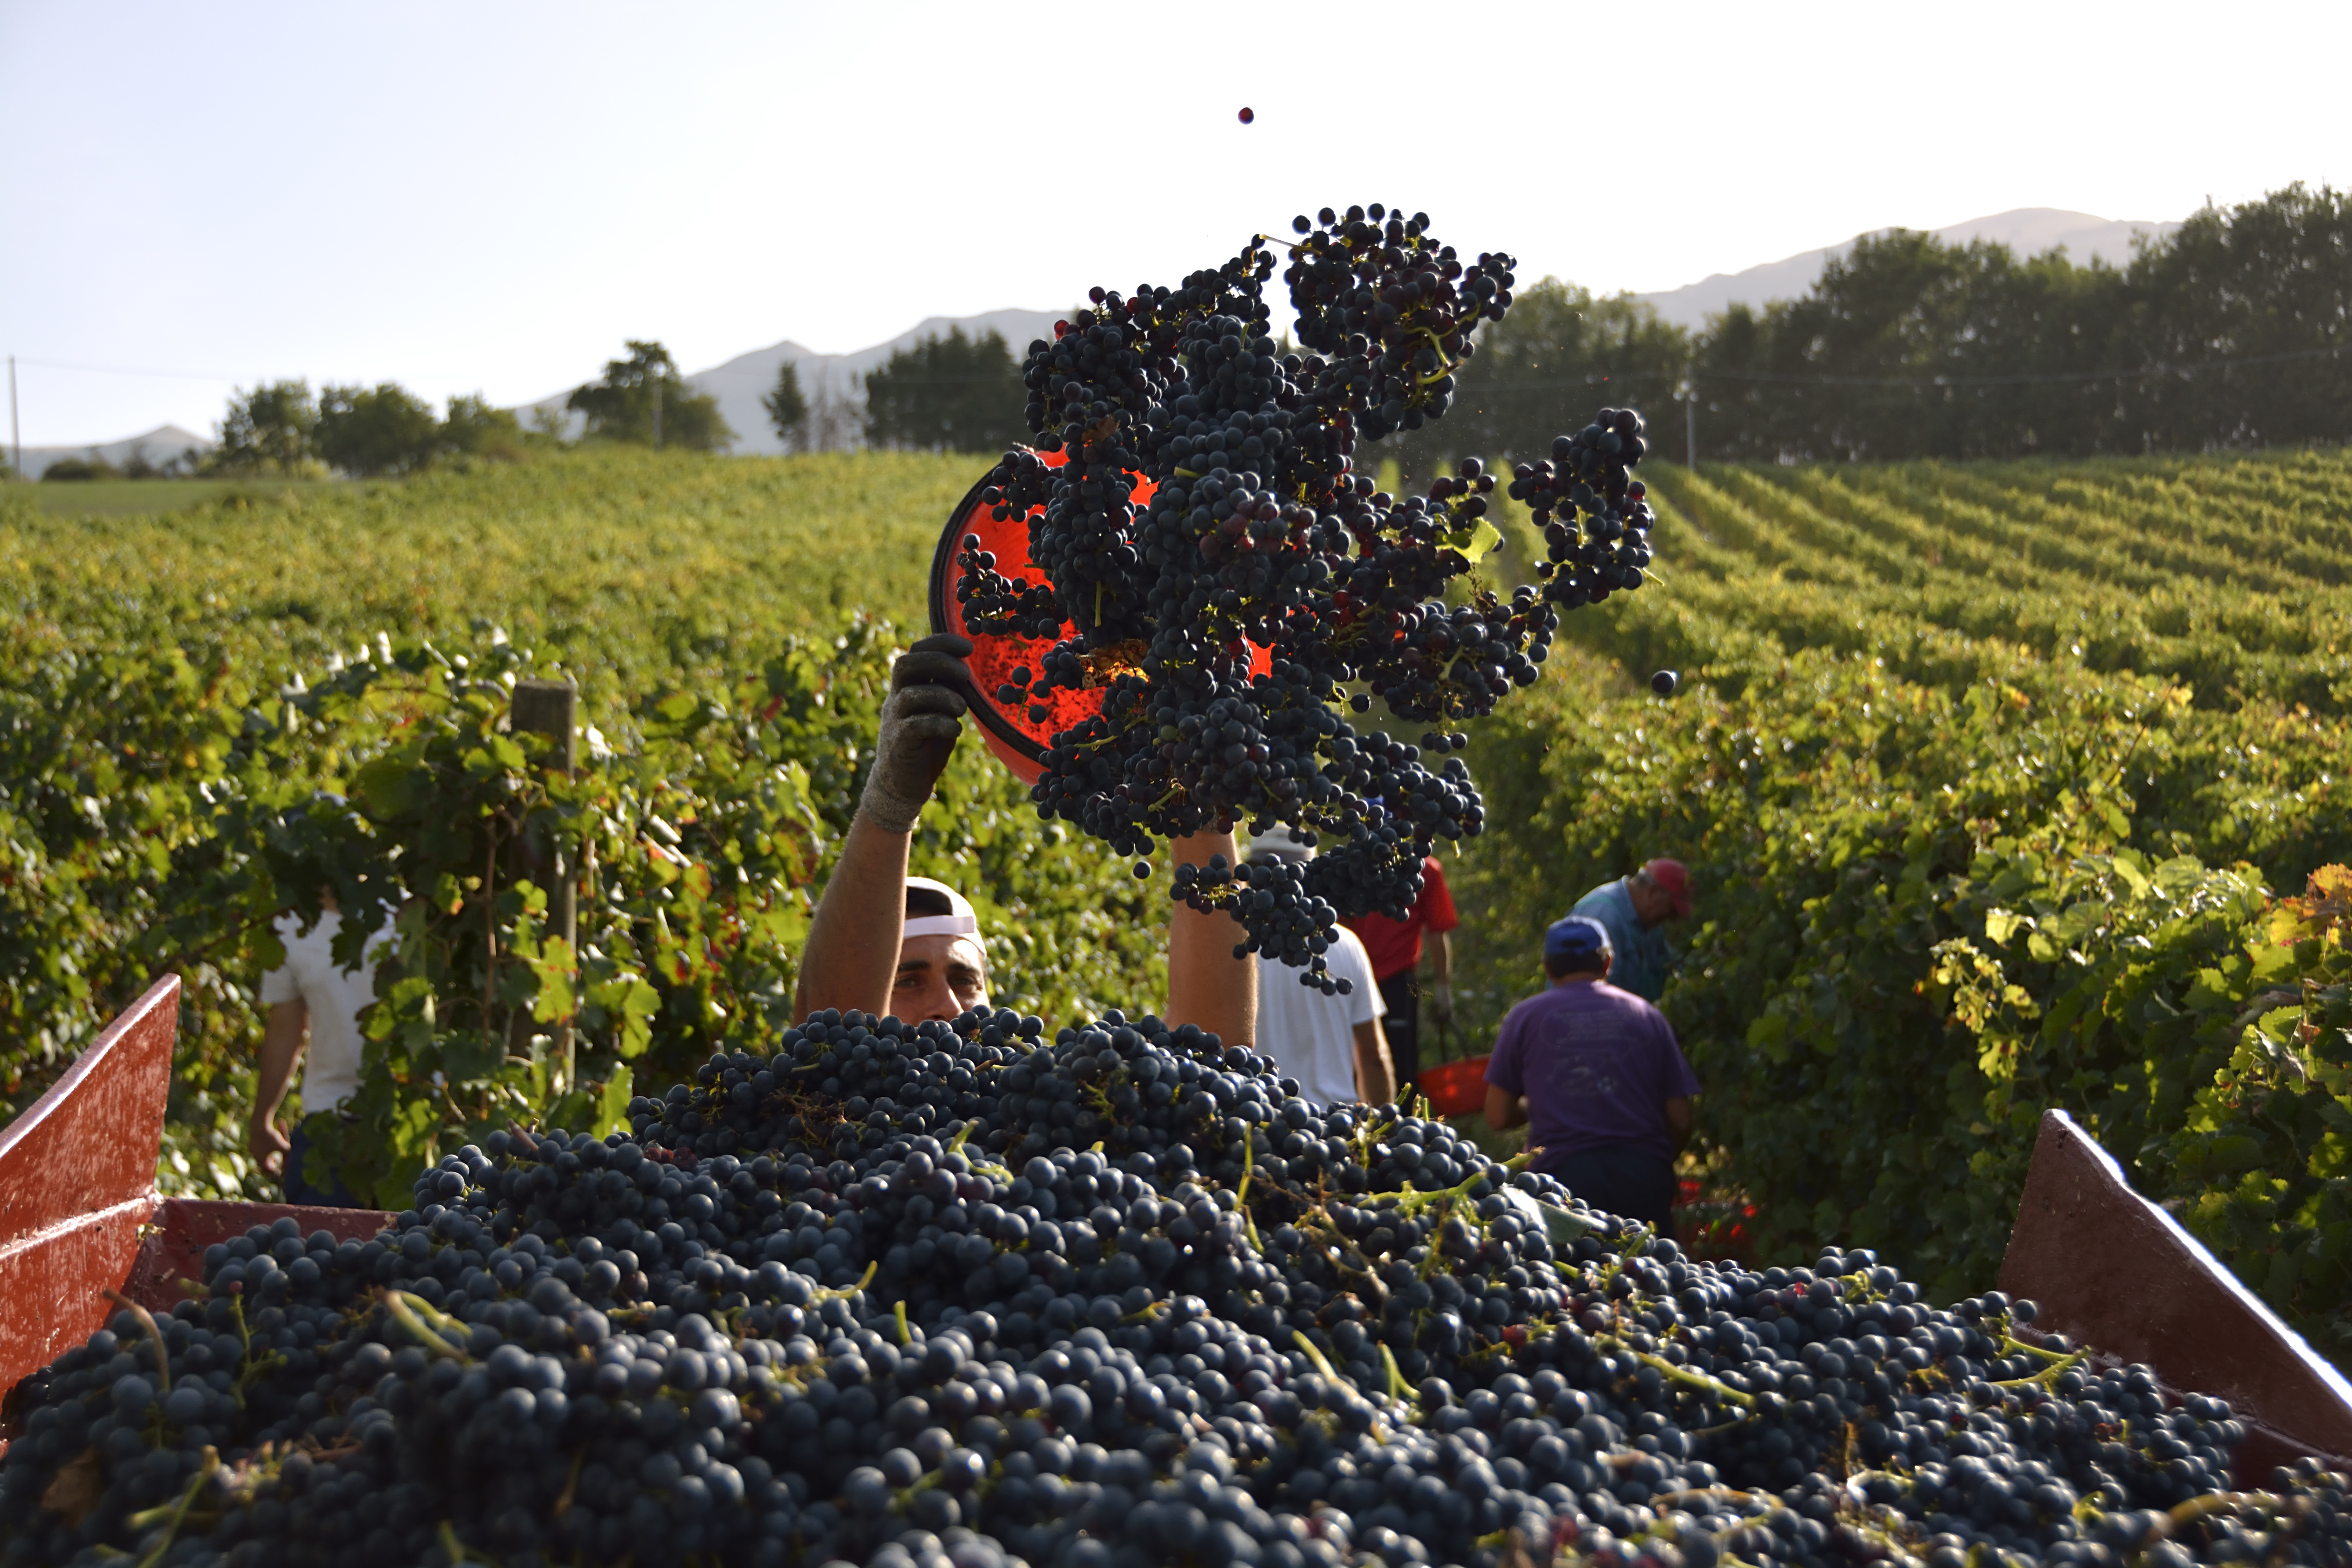 Workers harvesting Merlot grapes from a vineyard